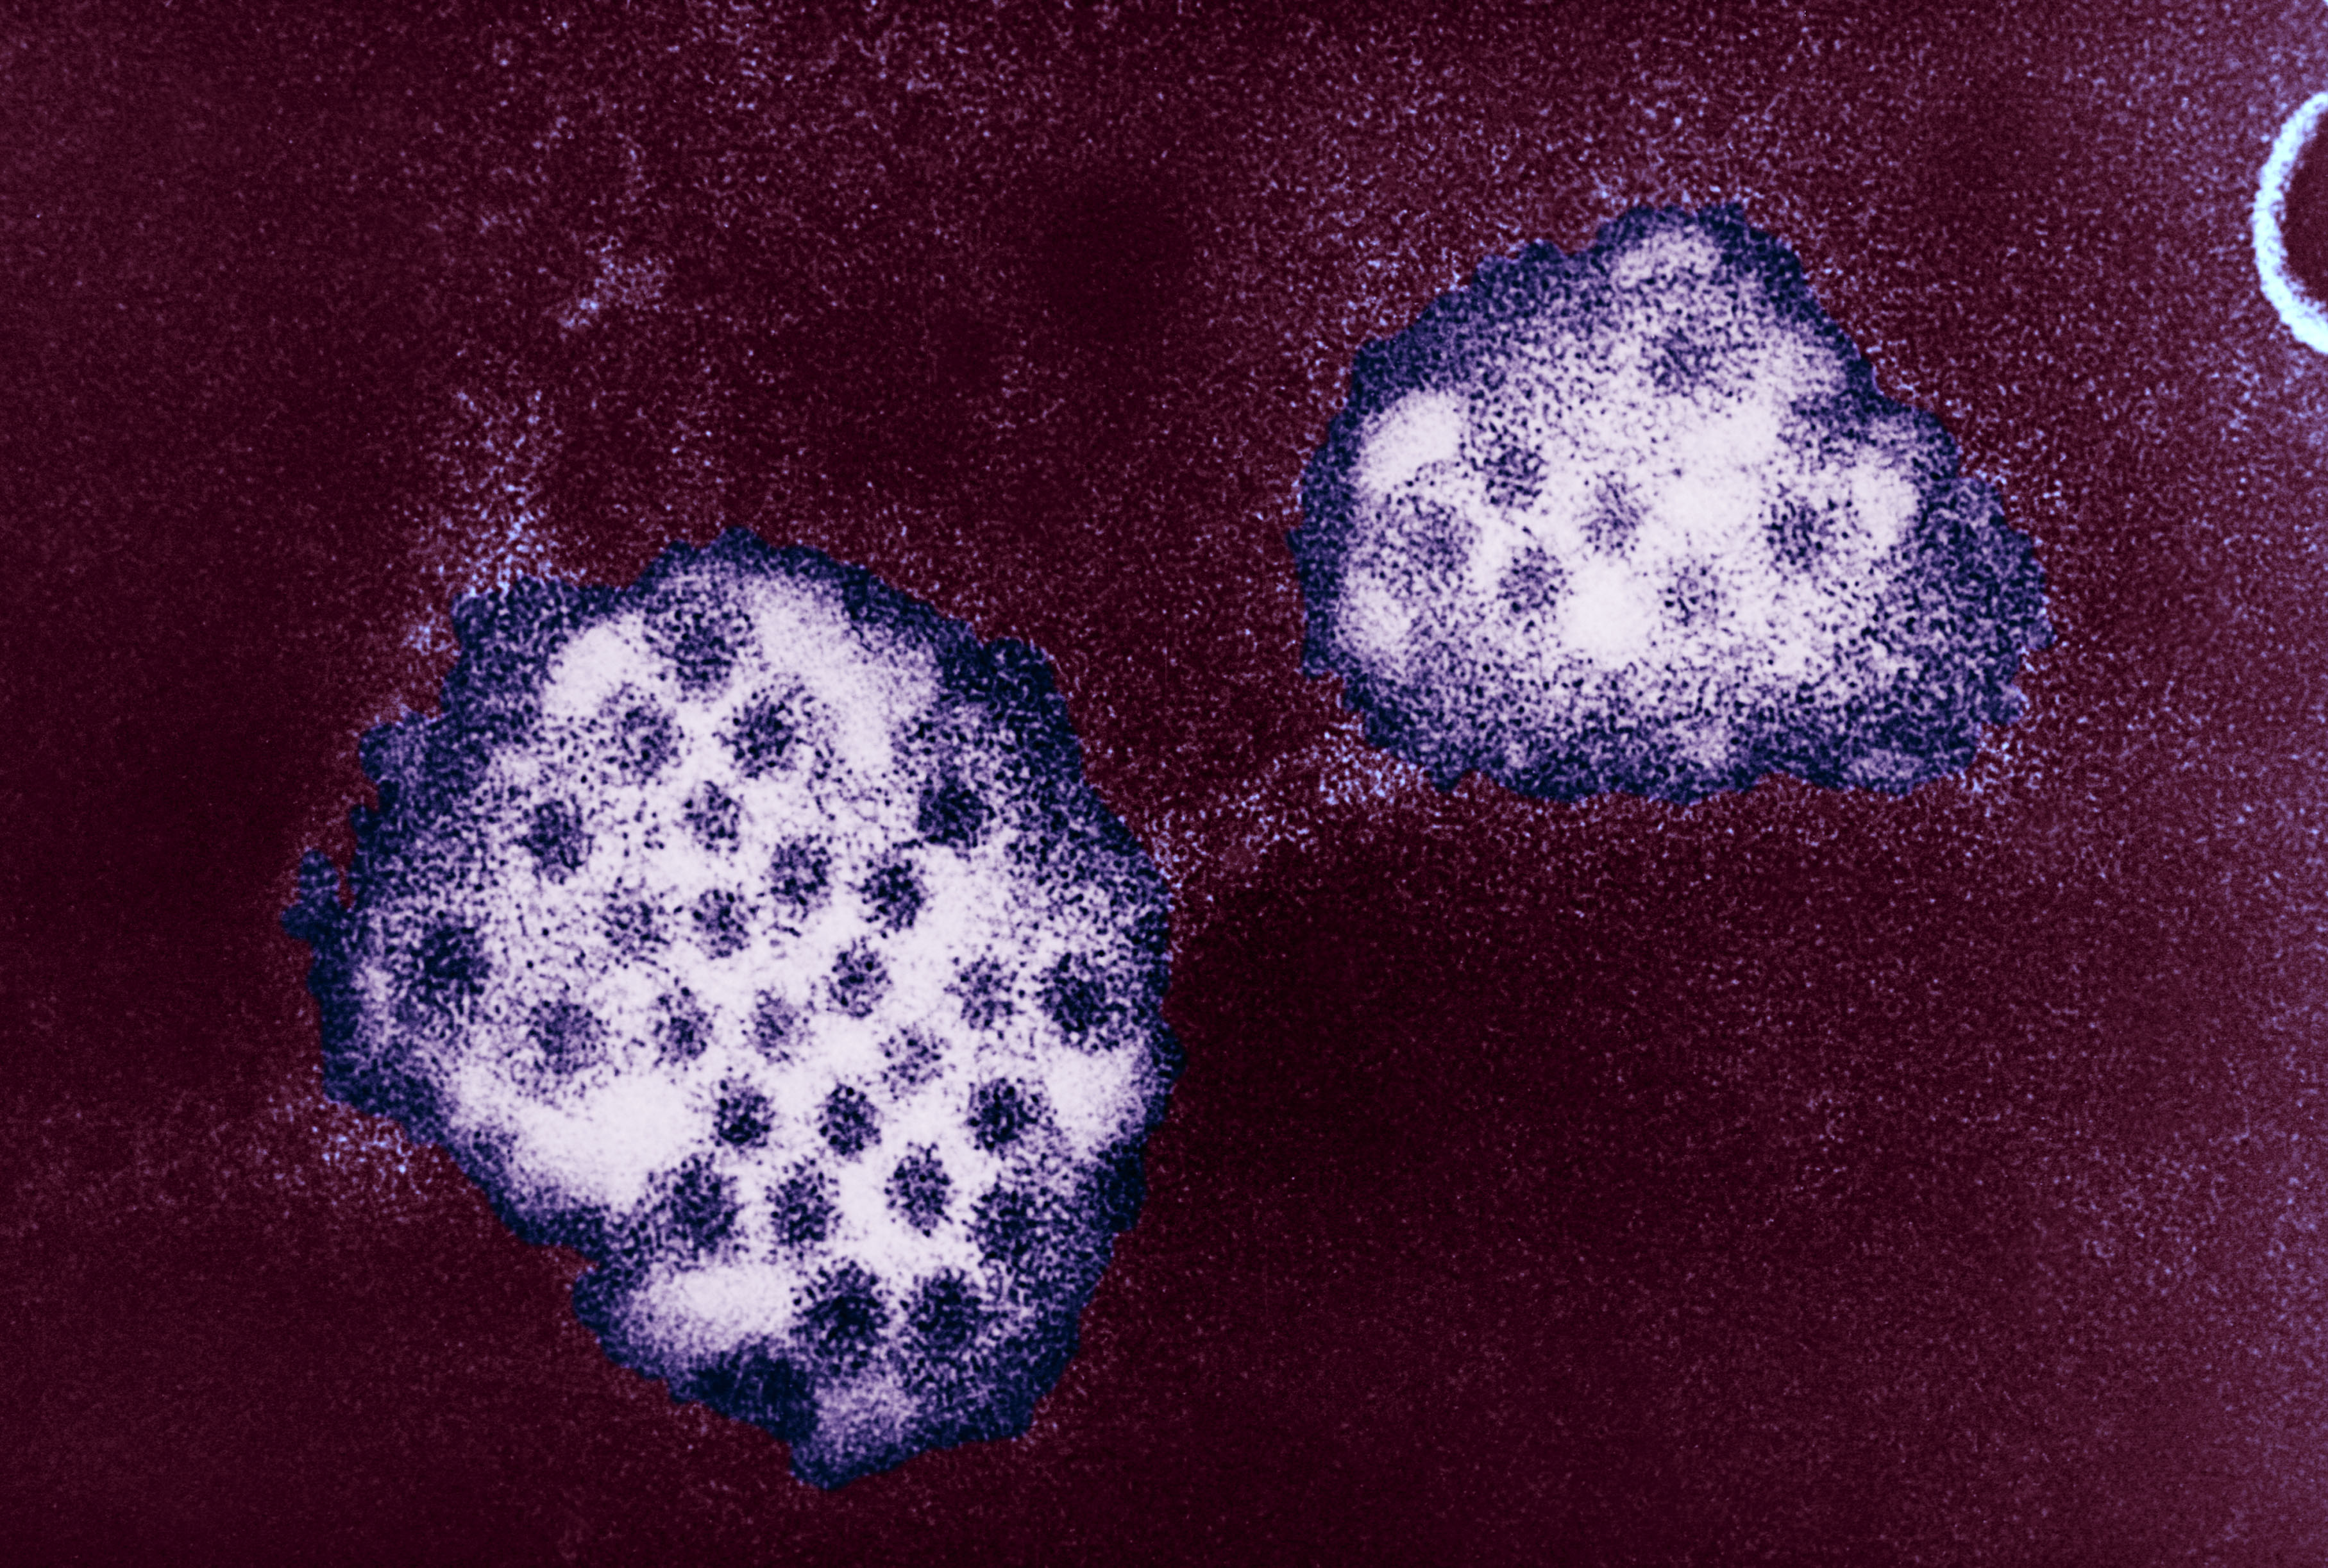 Norovirus cases spiking in U.S. What about Canada?